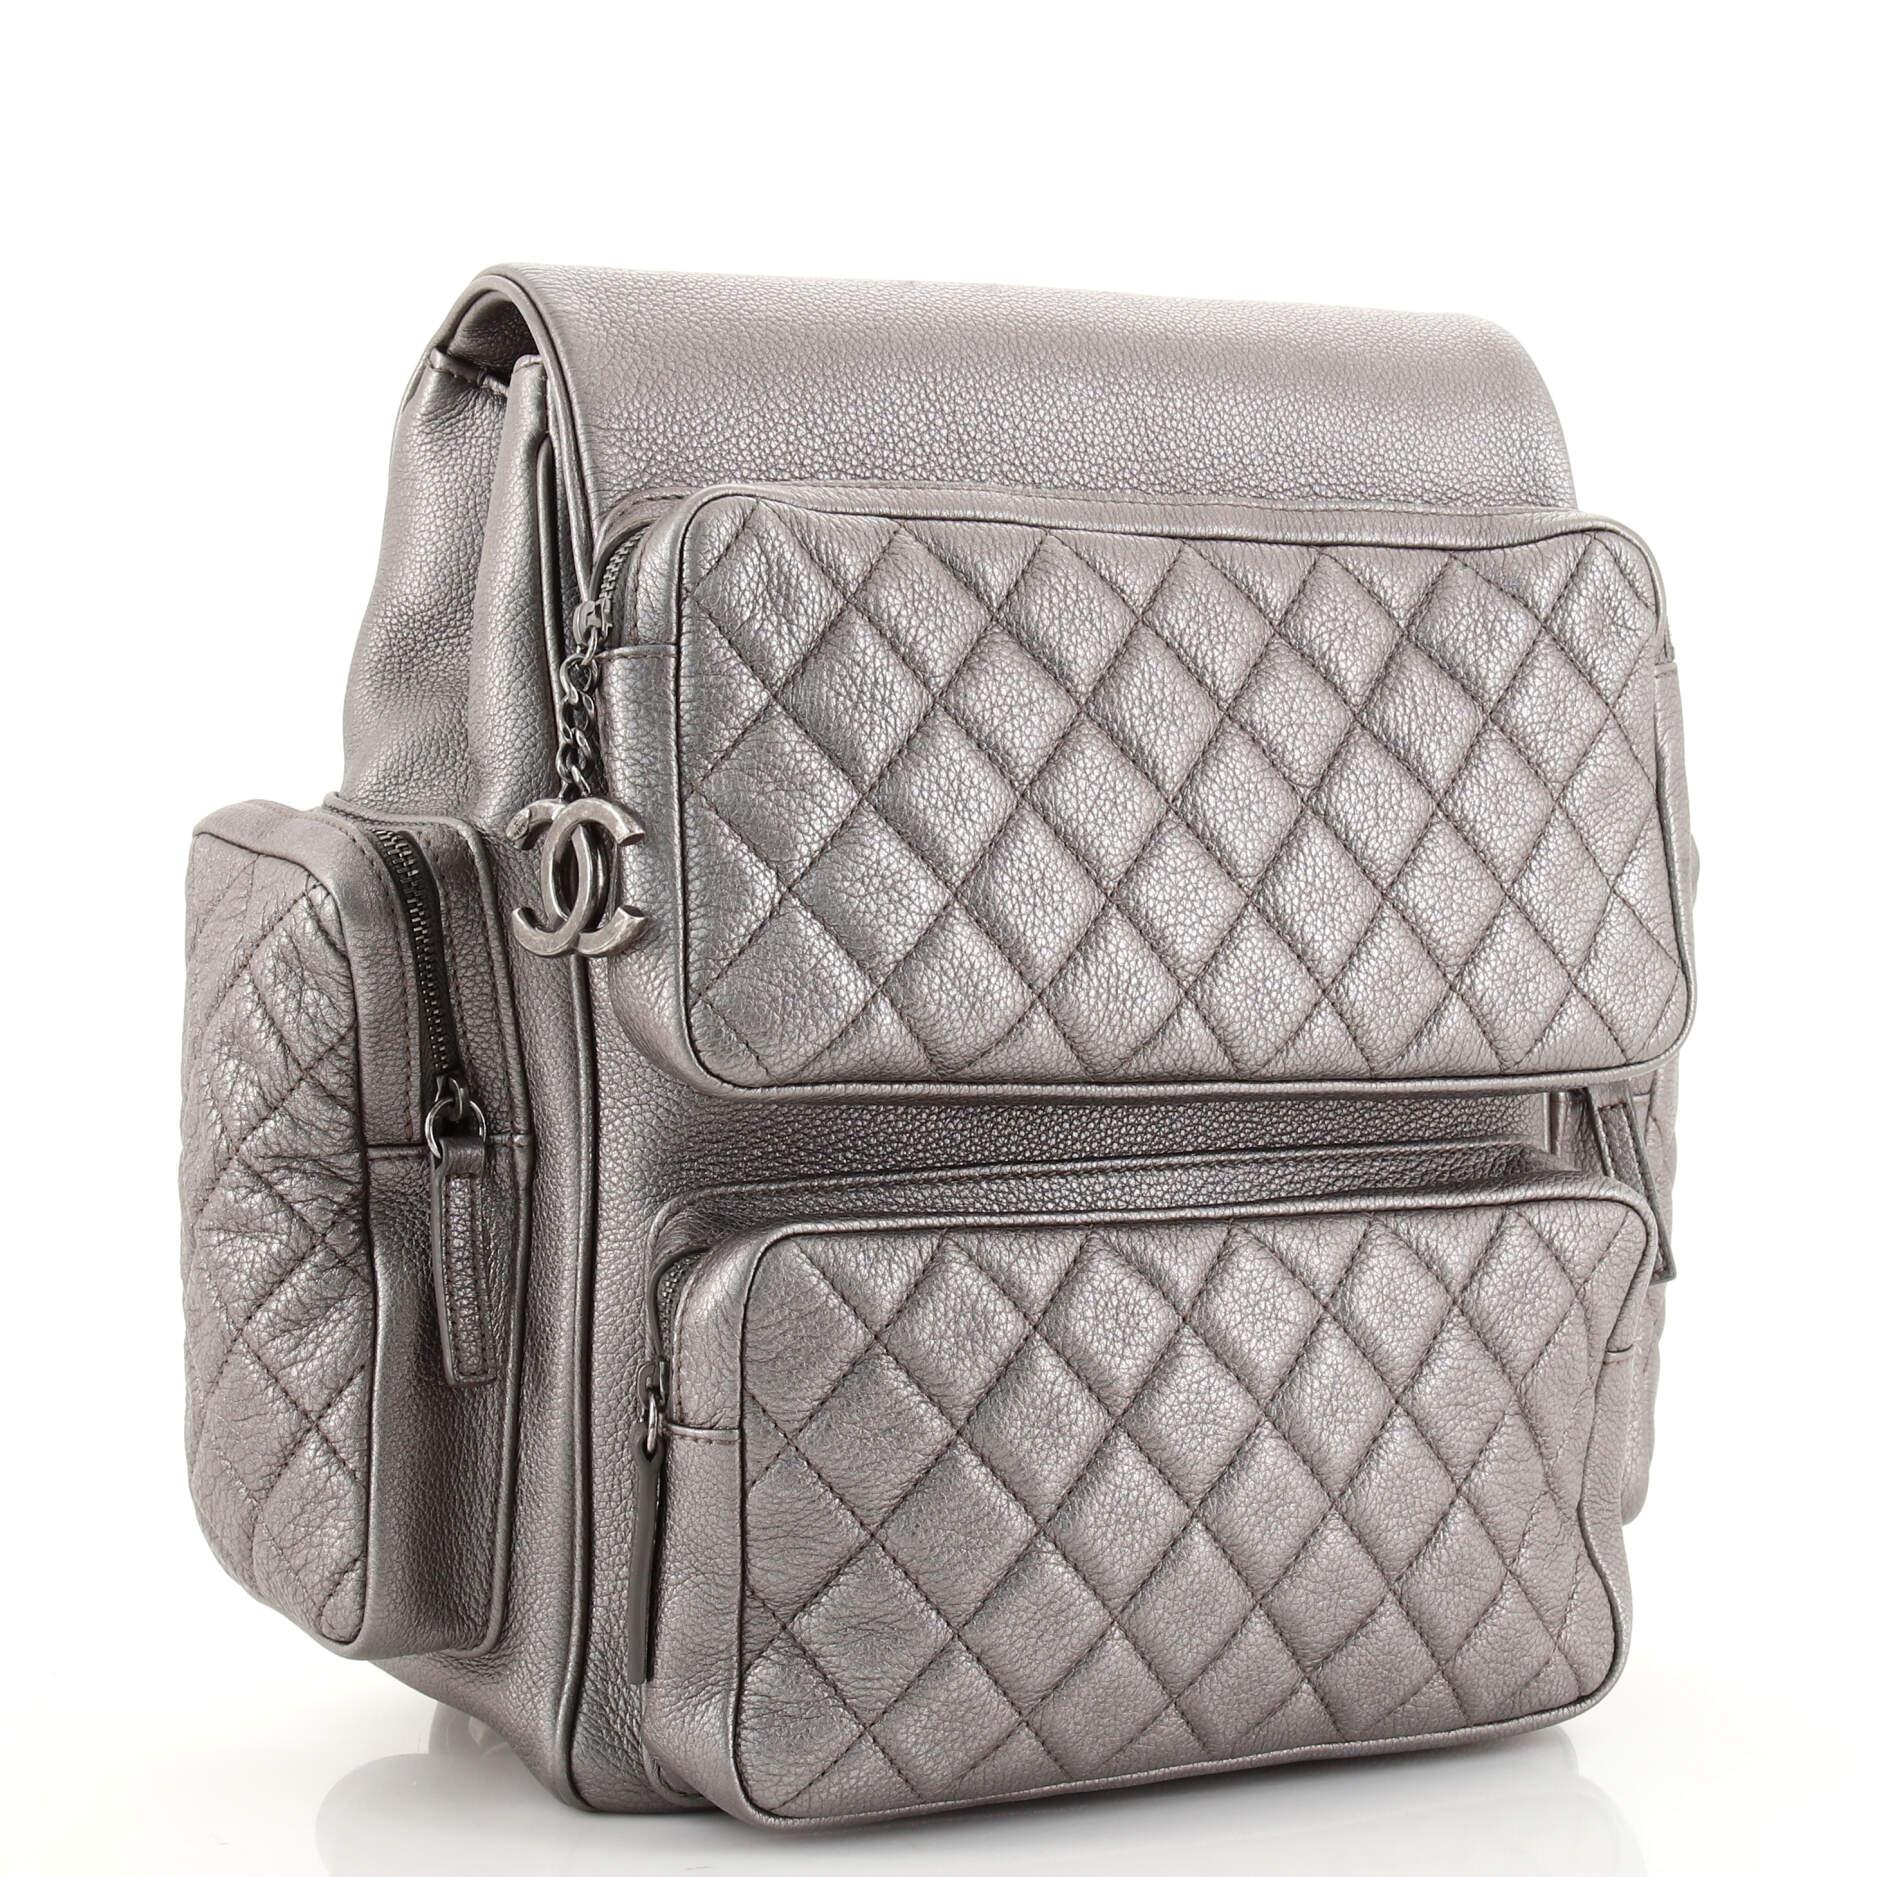 Gray Chanel Casual Rock Airlines Backpack Quilted Goatskin Medium